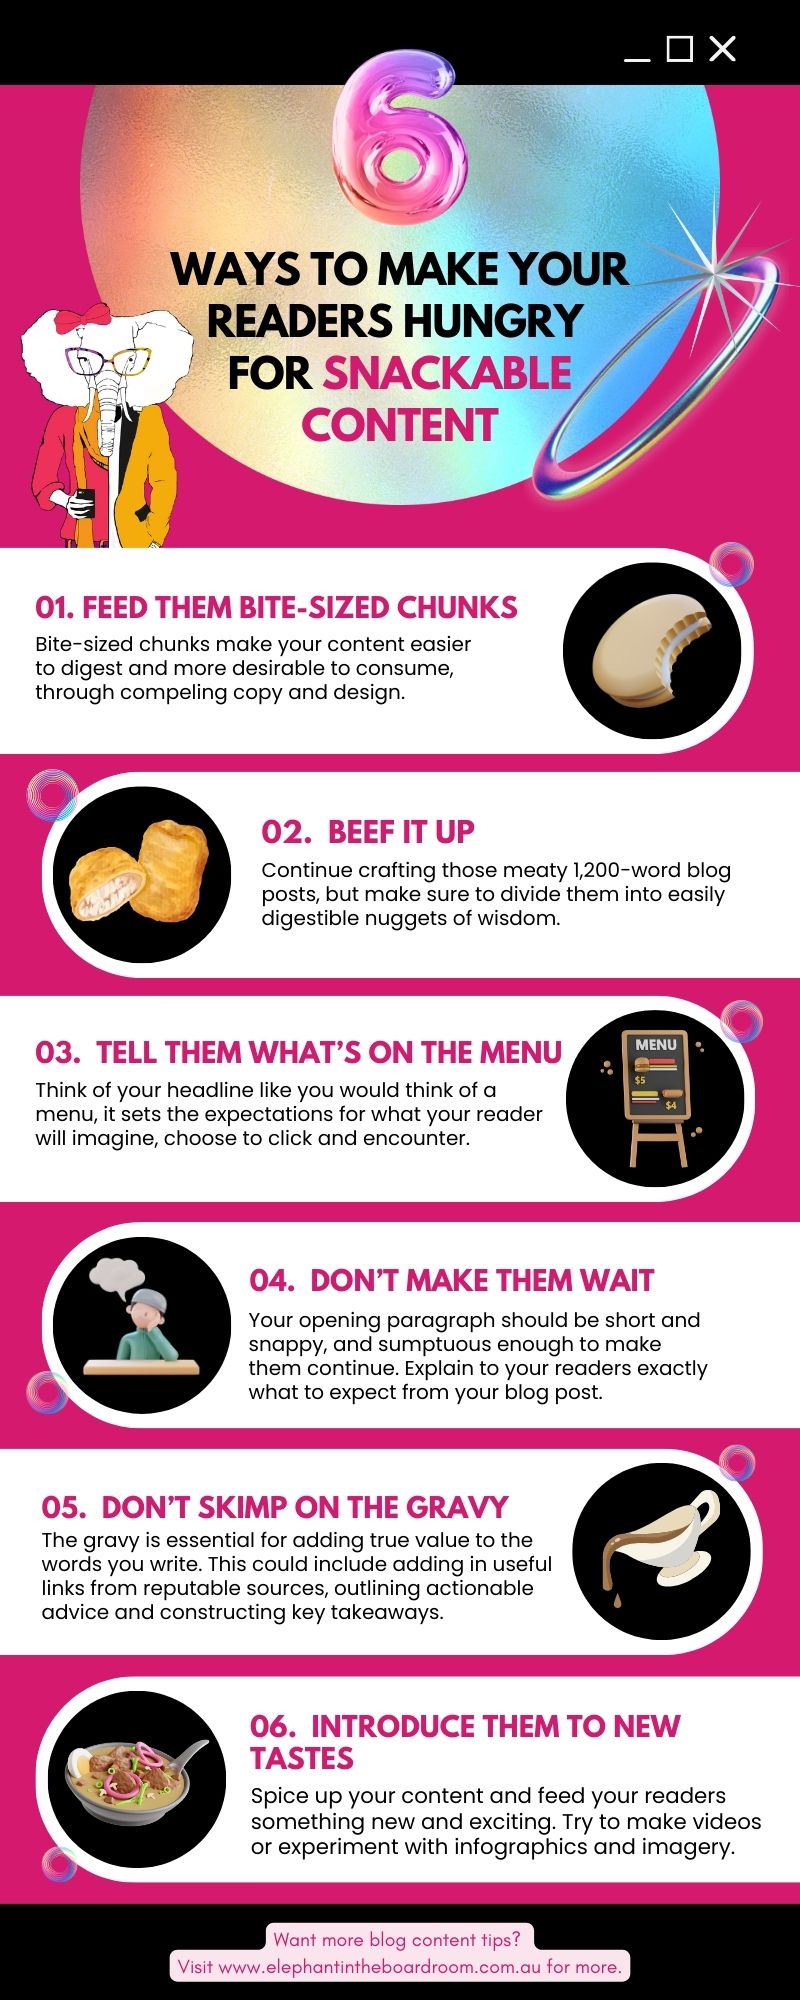 Infographics - Ways to Make Your Readers Hungry for Snackable Content